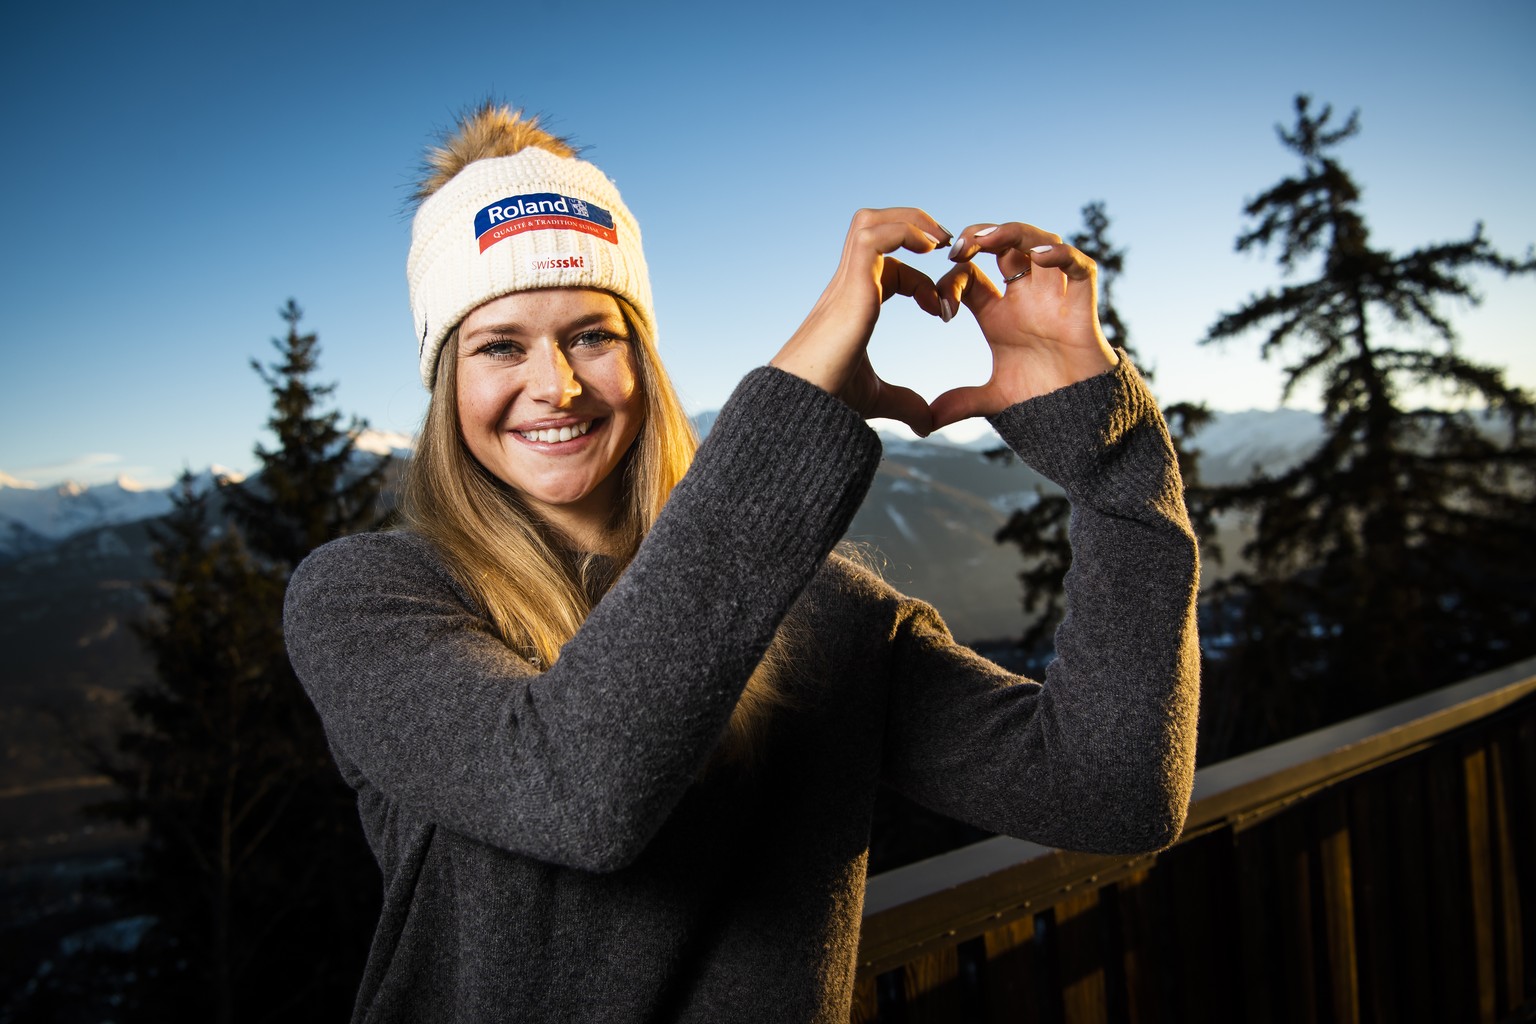 Ski racer Corinne Suter from Switzerland, poses to photographer during the Swiss-Ski federation press conference at the FIS Alpine Ski World Cup season in Crans-Montana, Switzerland, Thursday, Februar ...